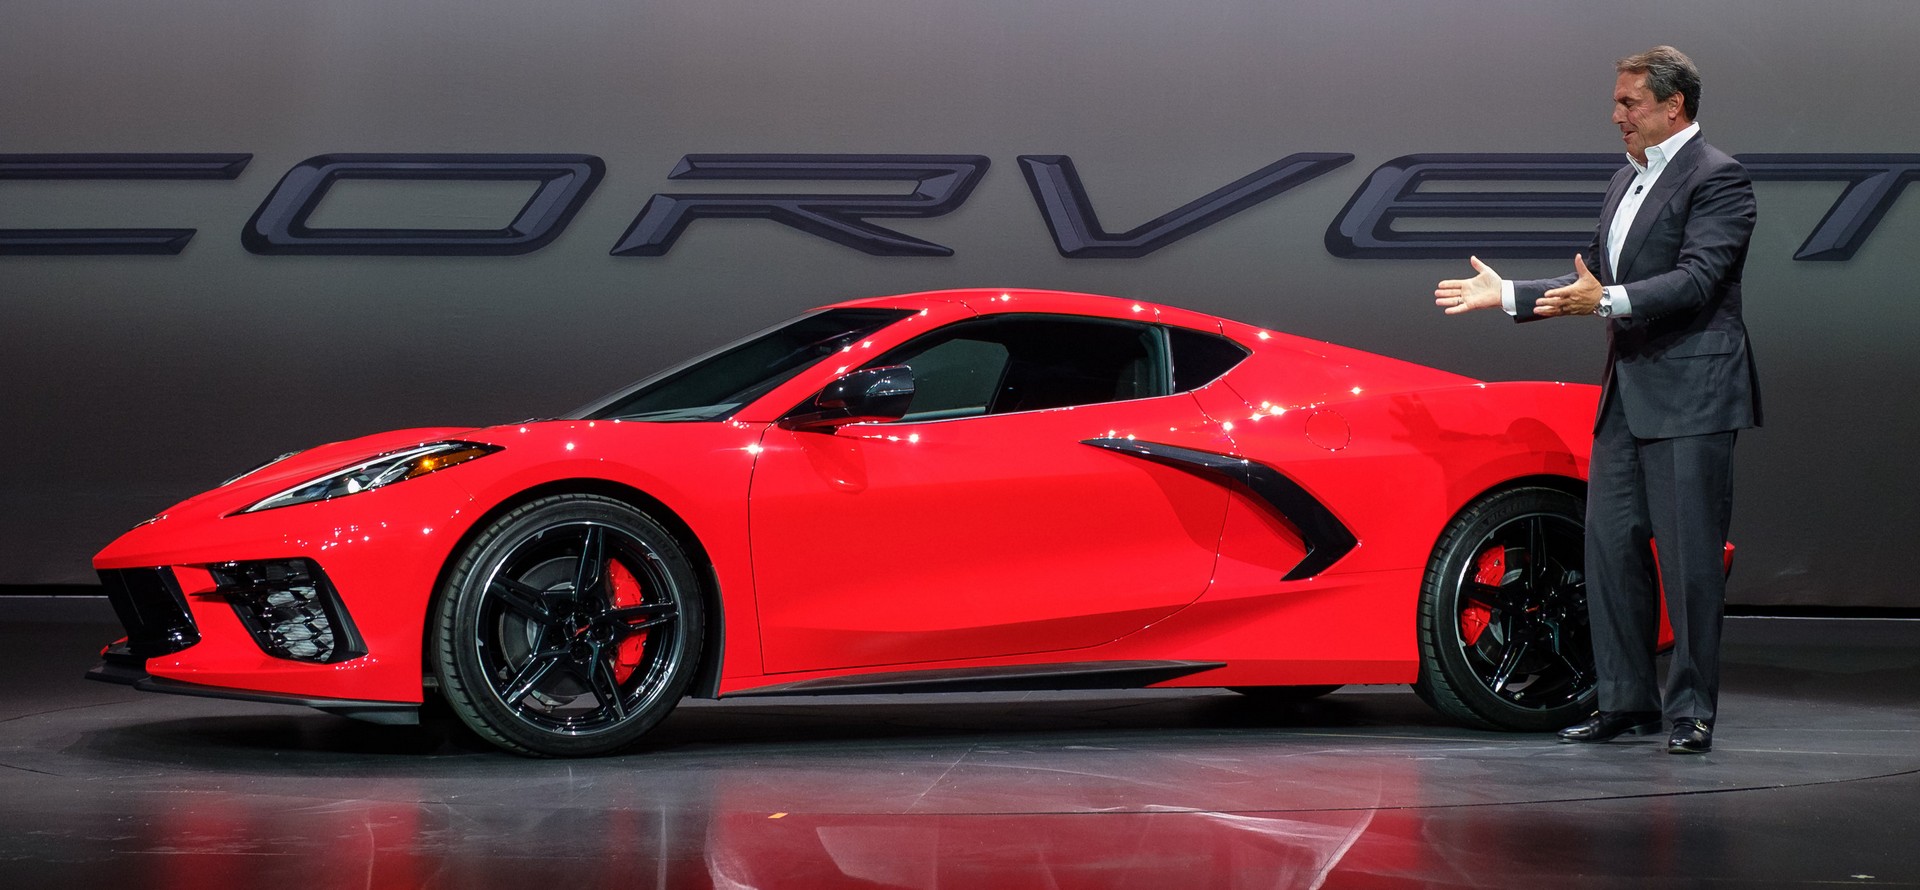 2020 Corvette C8 Is America S Mid Engine Sports Car For The